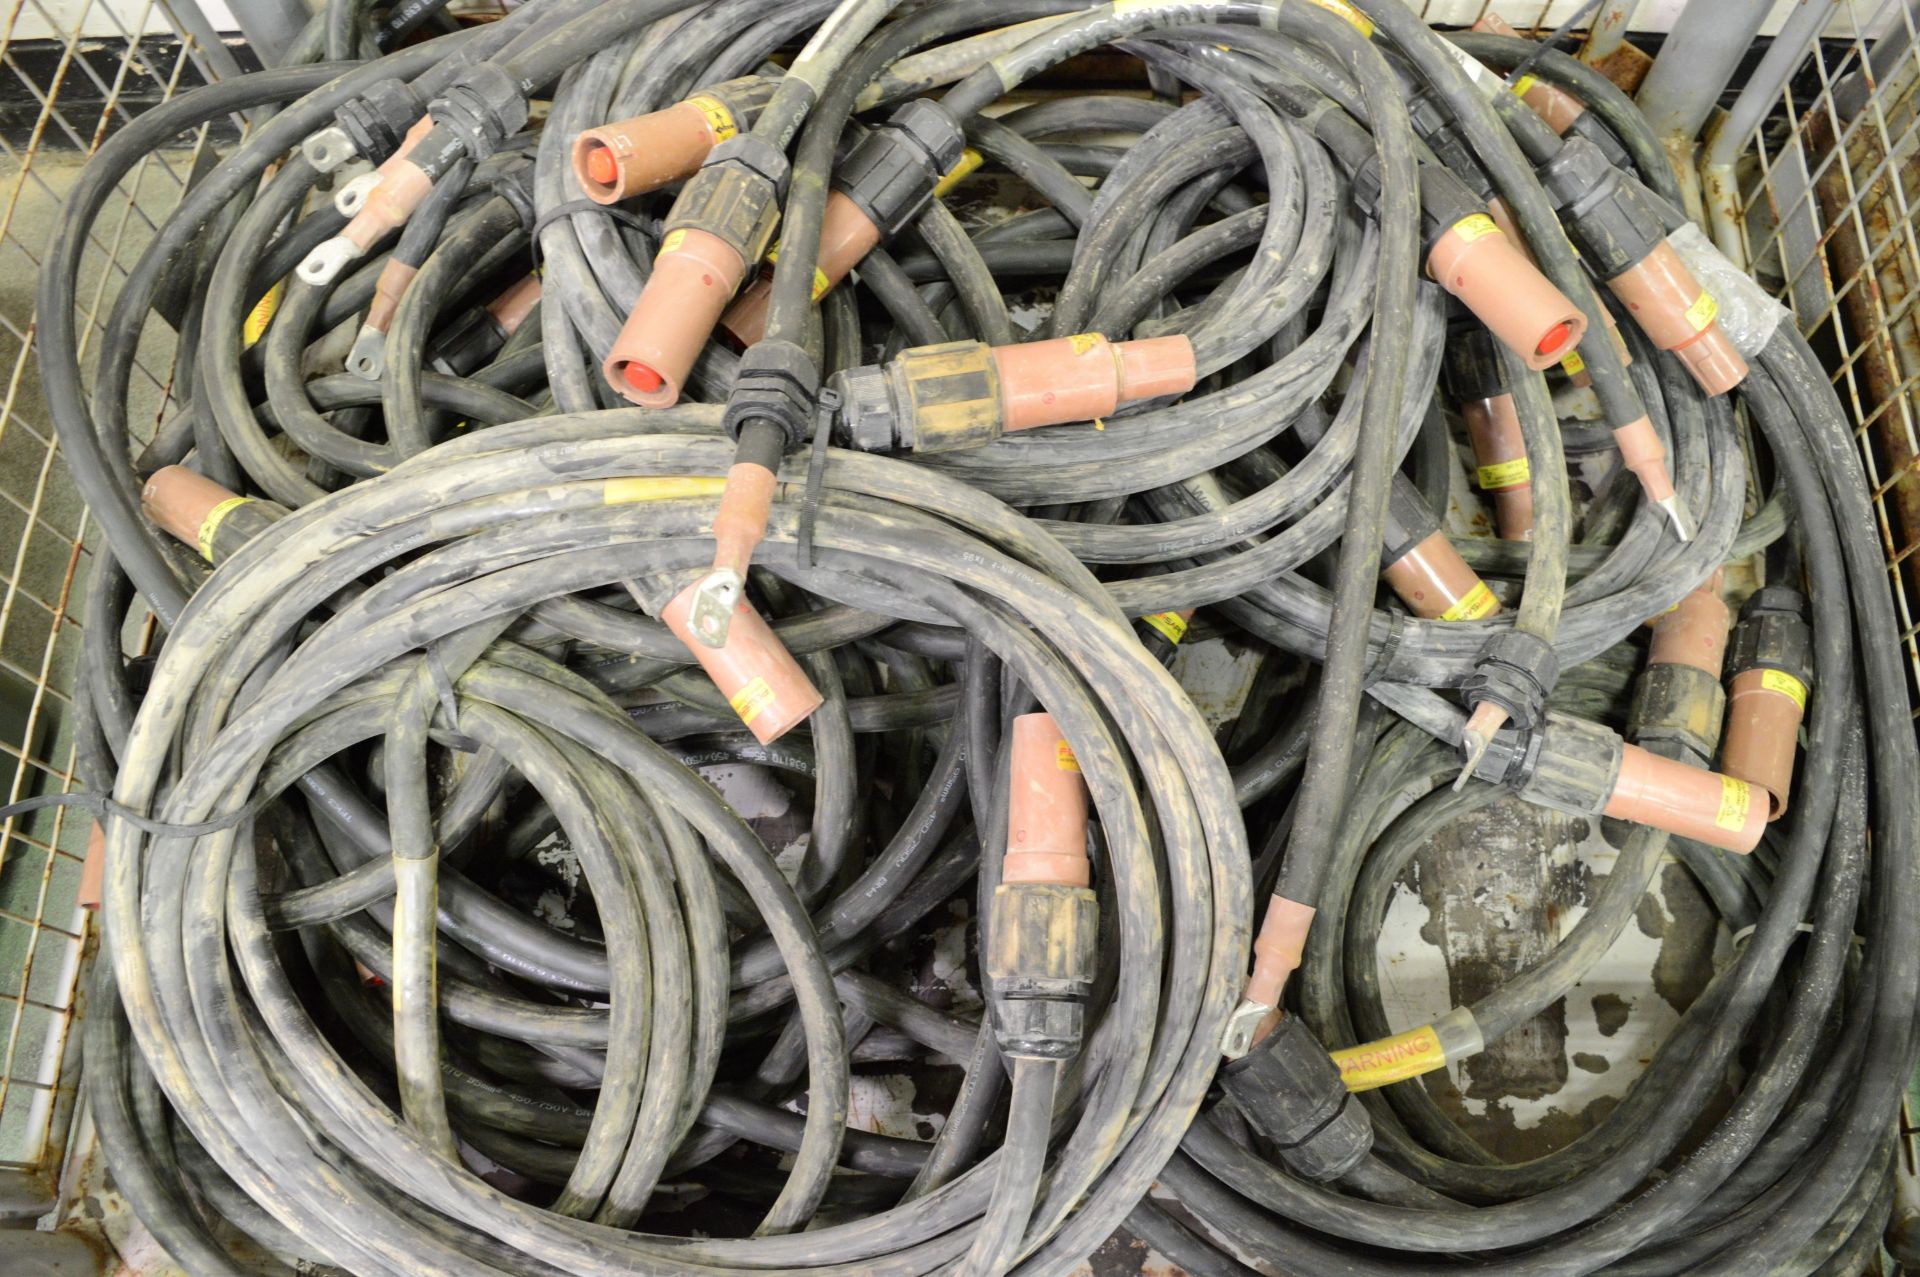 20x Lengths of 95mm2 Electrical Cable. - Image 2 of 2